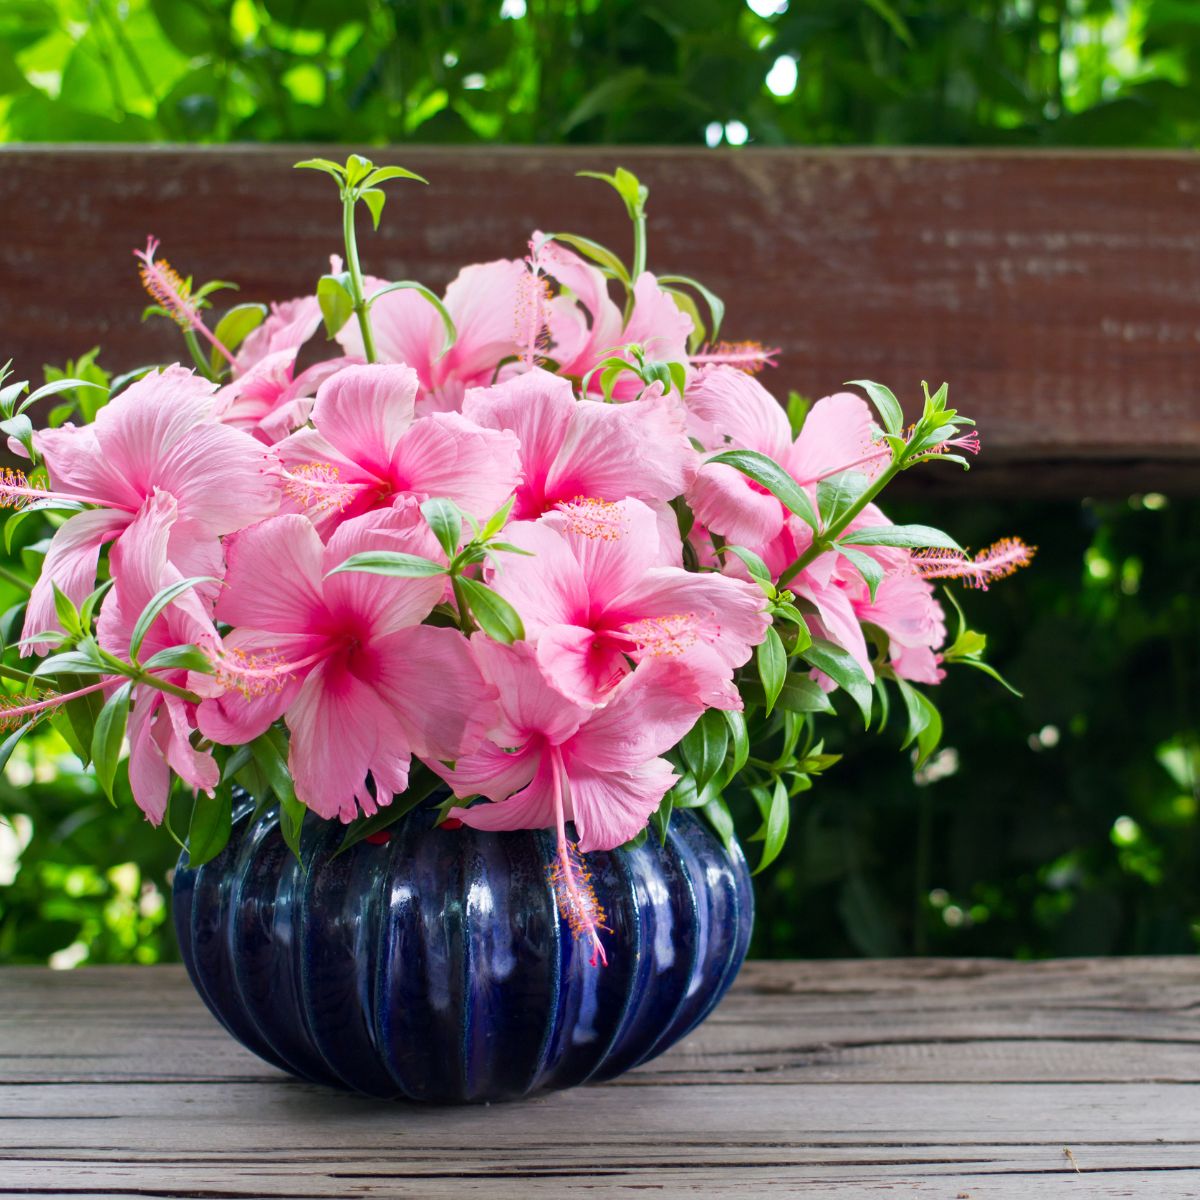 Pink hibiscus flowers in a blue vase on the porch.